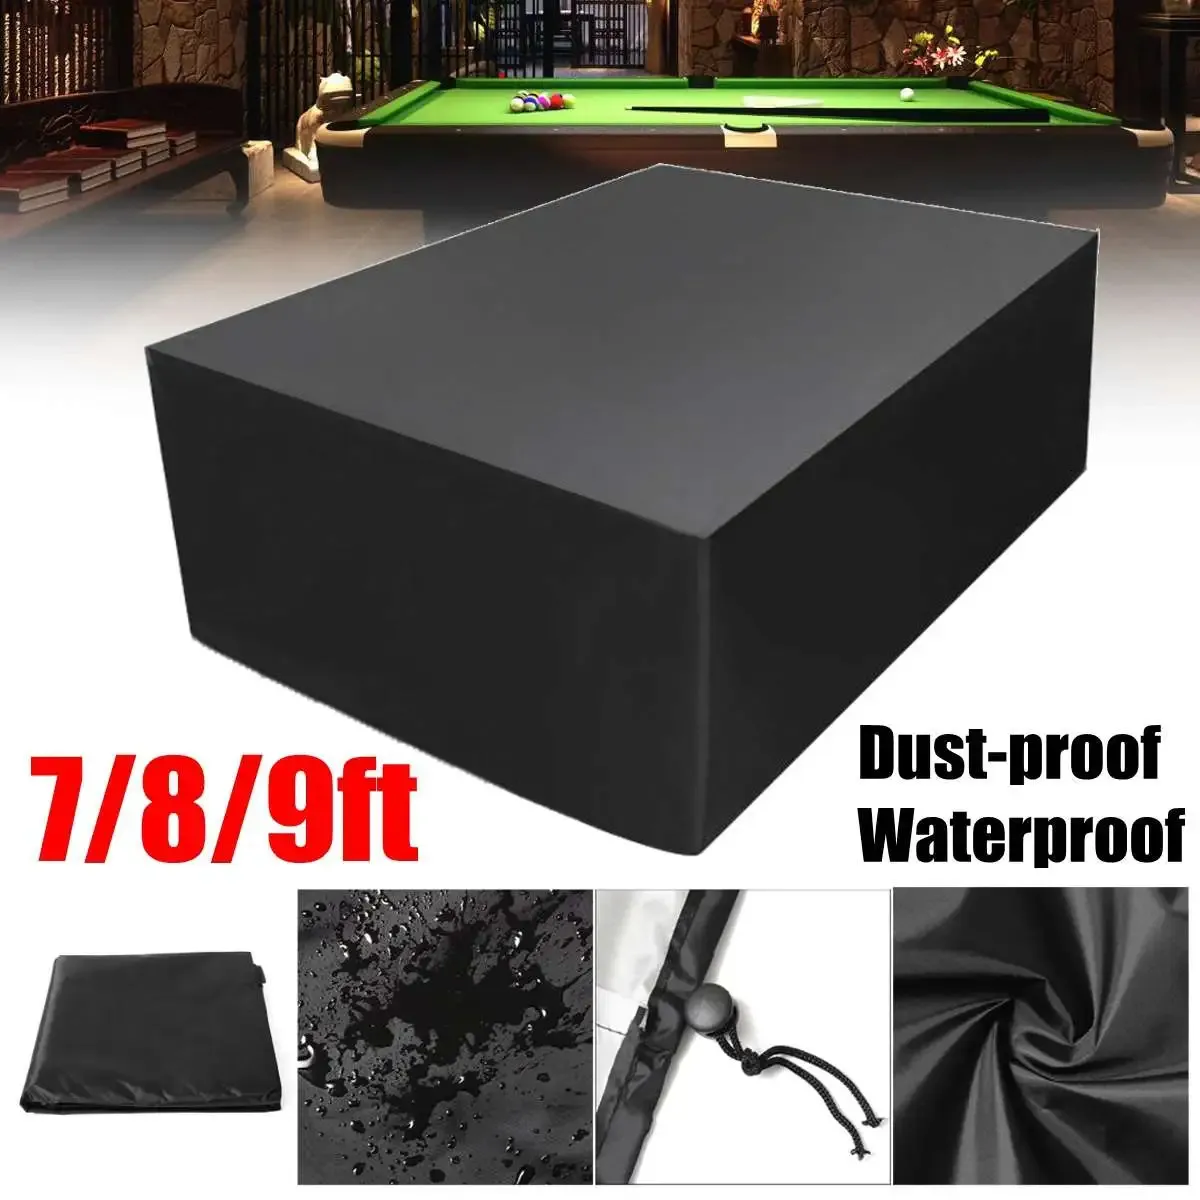 Dust Cover Dustproof Waterproof Outdoor Full Pool Solid With Drawstring 7 8 9 Foot Billiard Table Dust Cover Table Protector Oxford Cloth 231007